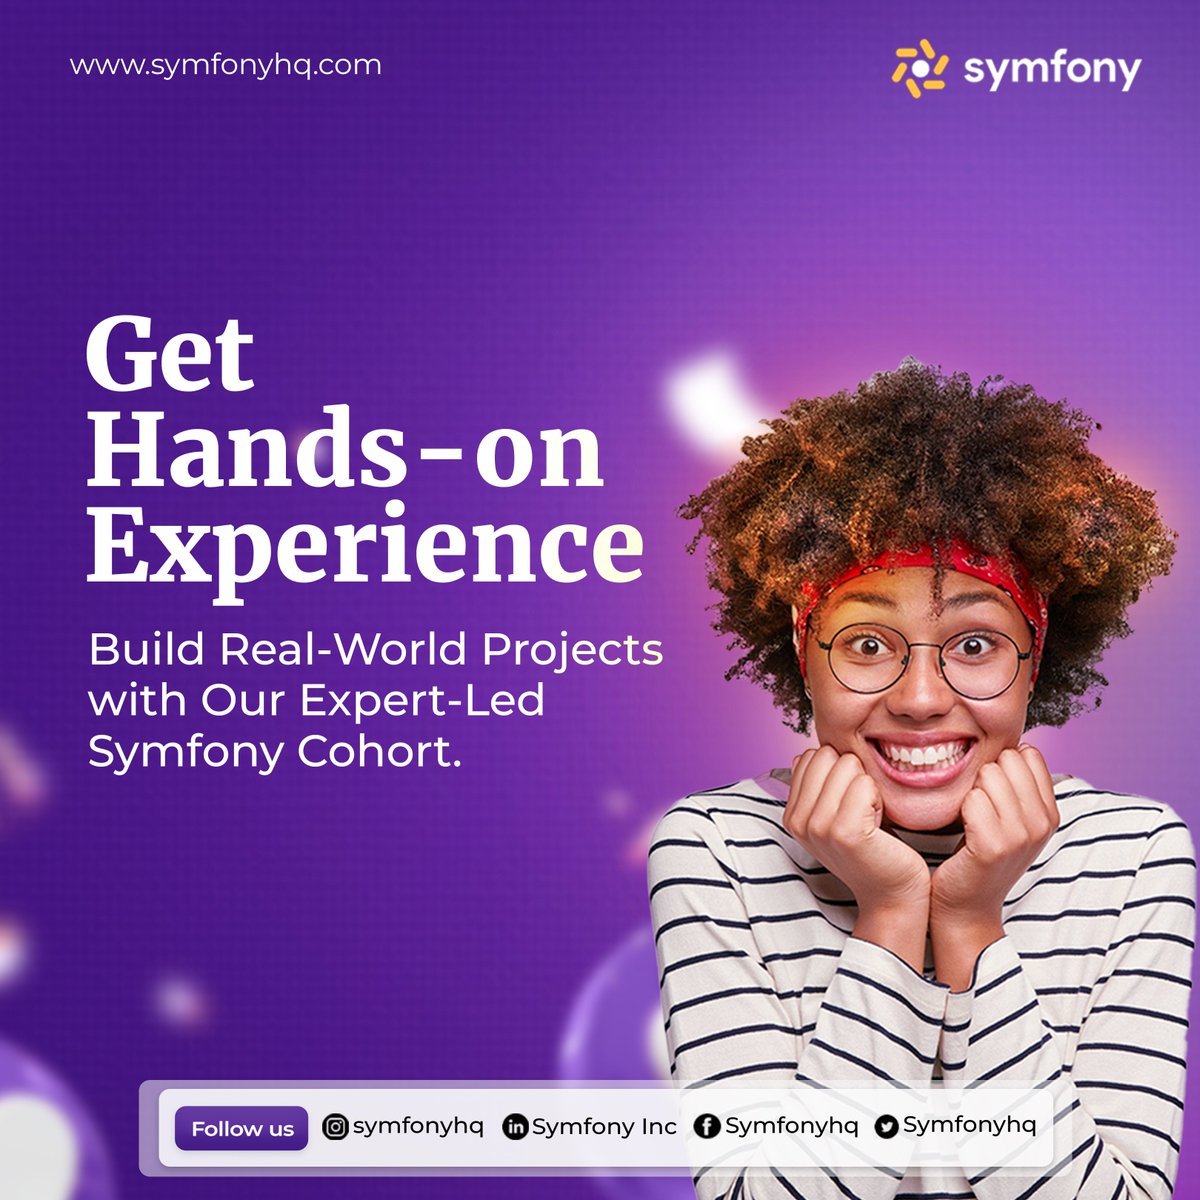 🚀 Exciting news! Our expert-led Symfony Cohort is here! Get hands-on experience building real-world projects in #ProductManagement, #ScrumMaster, and #QAEngineering. Don't miss out! #SymfonyCohort #TechSkills